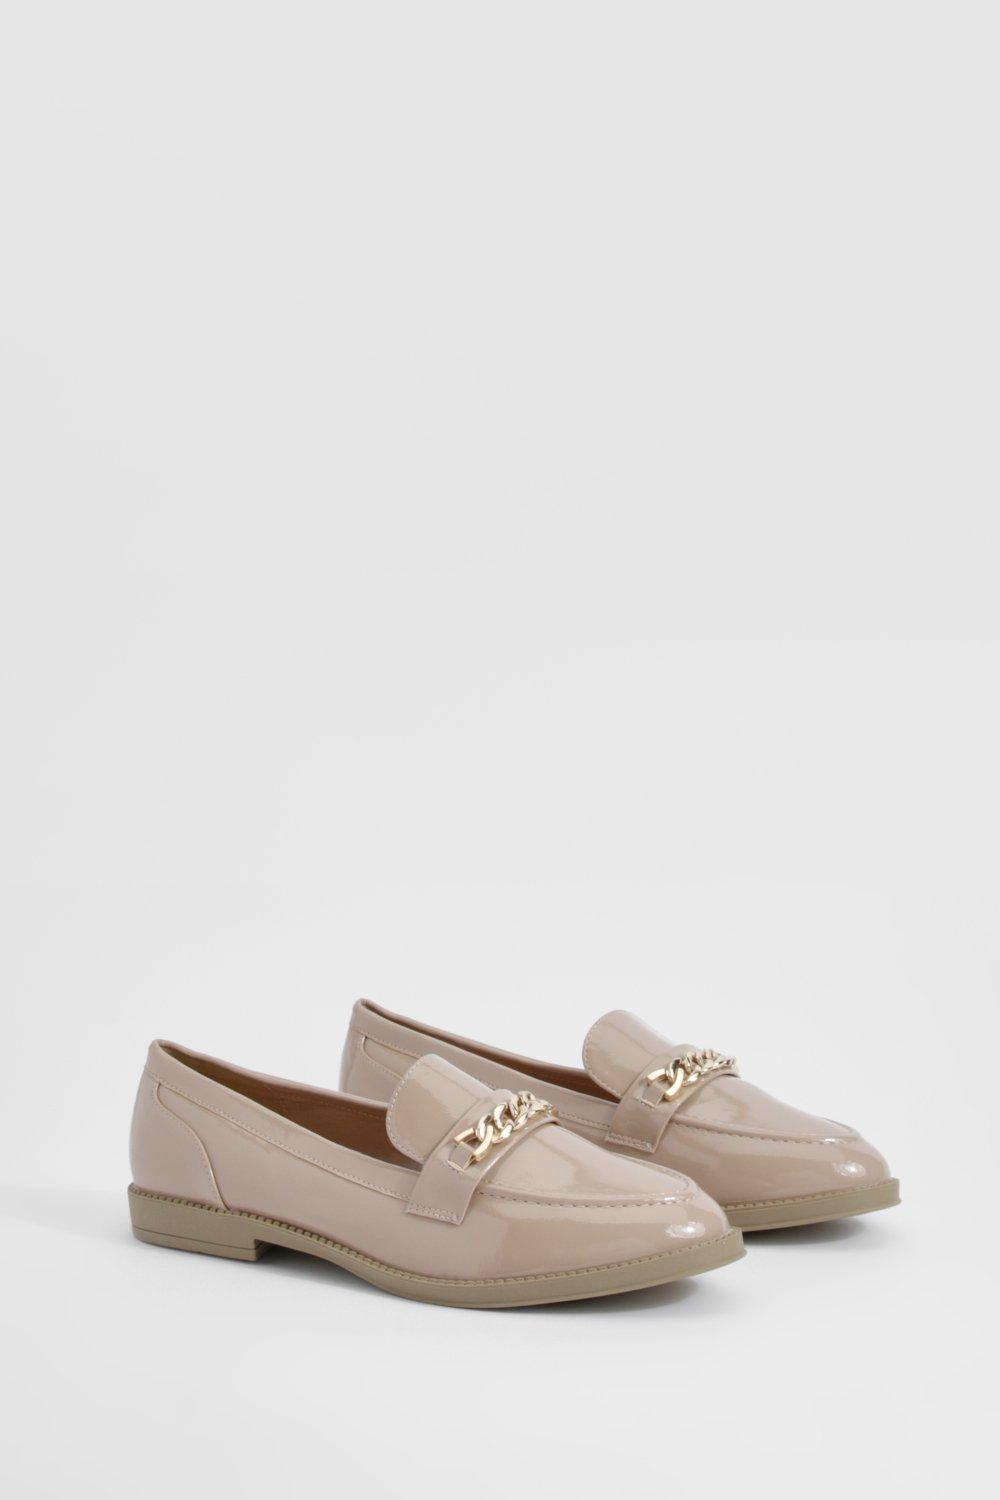 Boohoo Wide Fit Chain Trim Patent Loafers, Beige